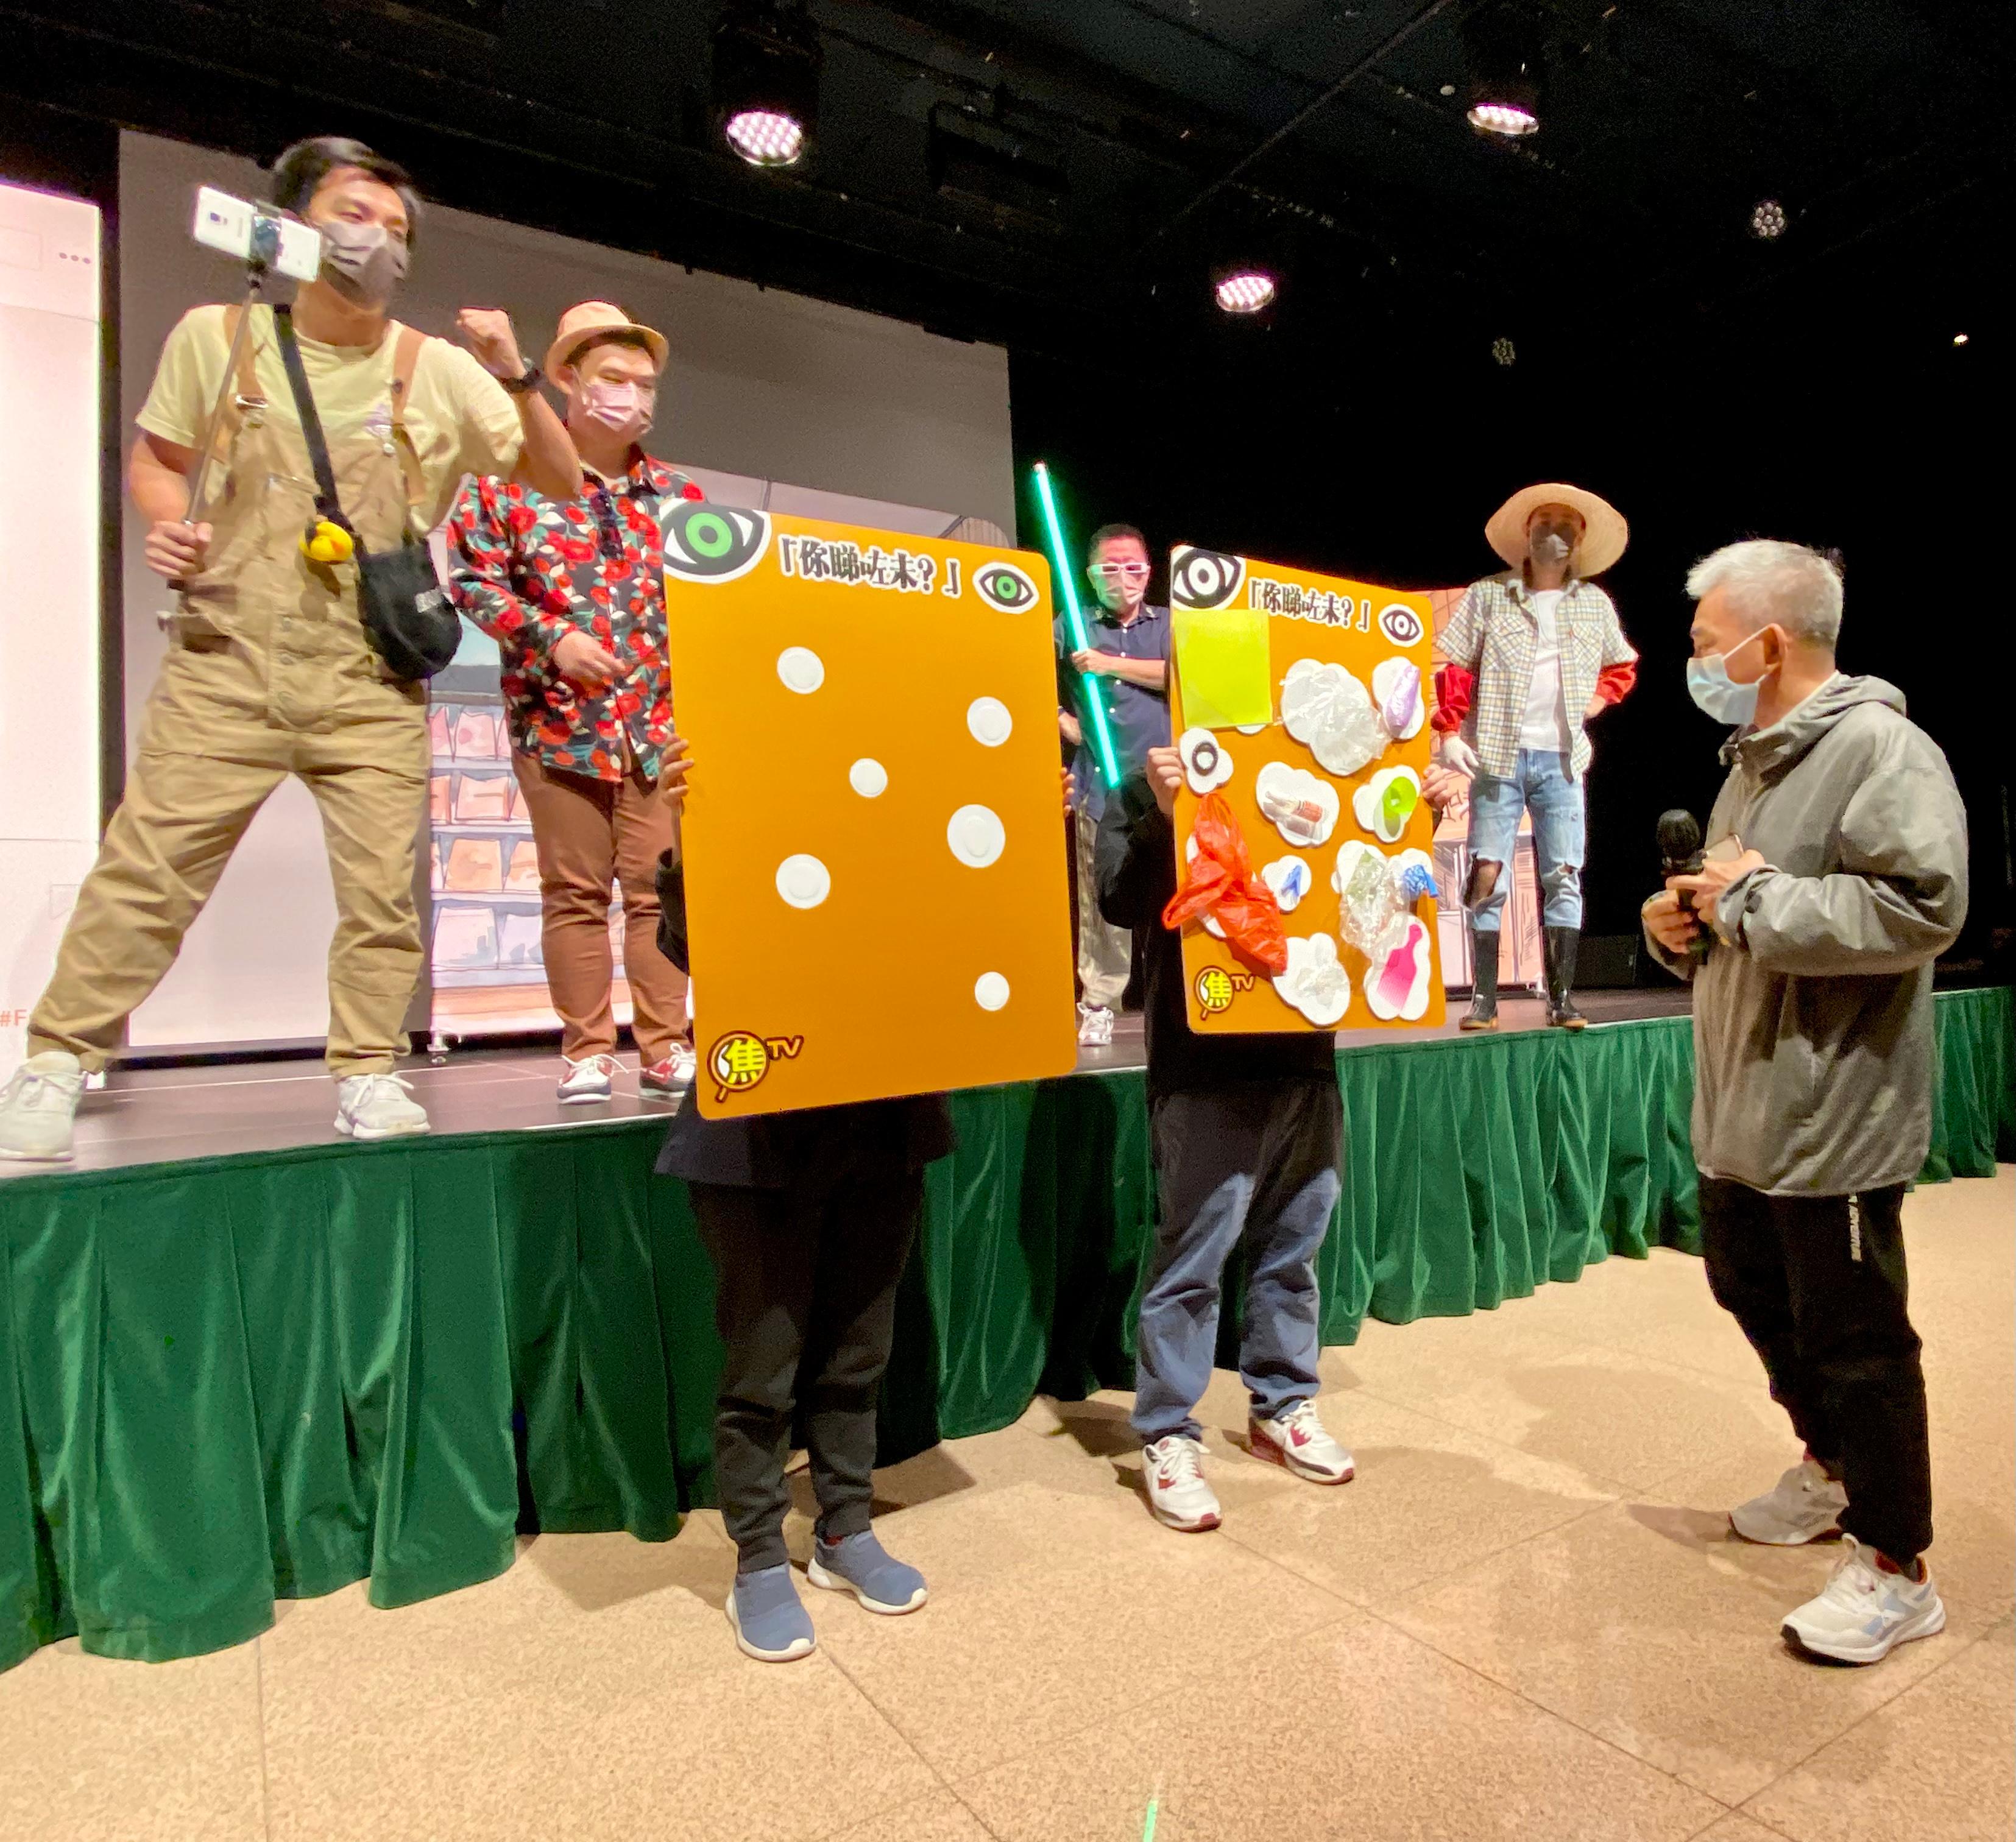 The Council for Sustainable Development, organised an interactive drama and public engagement forum on control of single-use plastics for the elderly from the Elder Academy Scheme under the Elderly Commission today (December 3) at Sha Tin Town Hall. Photo shows an elderly man participating in an interactive game.